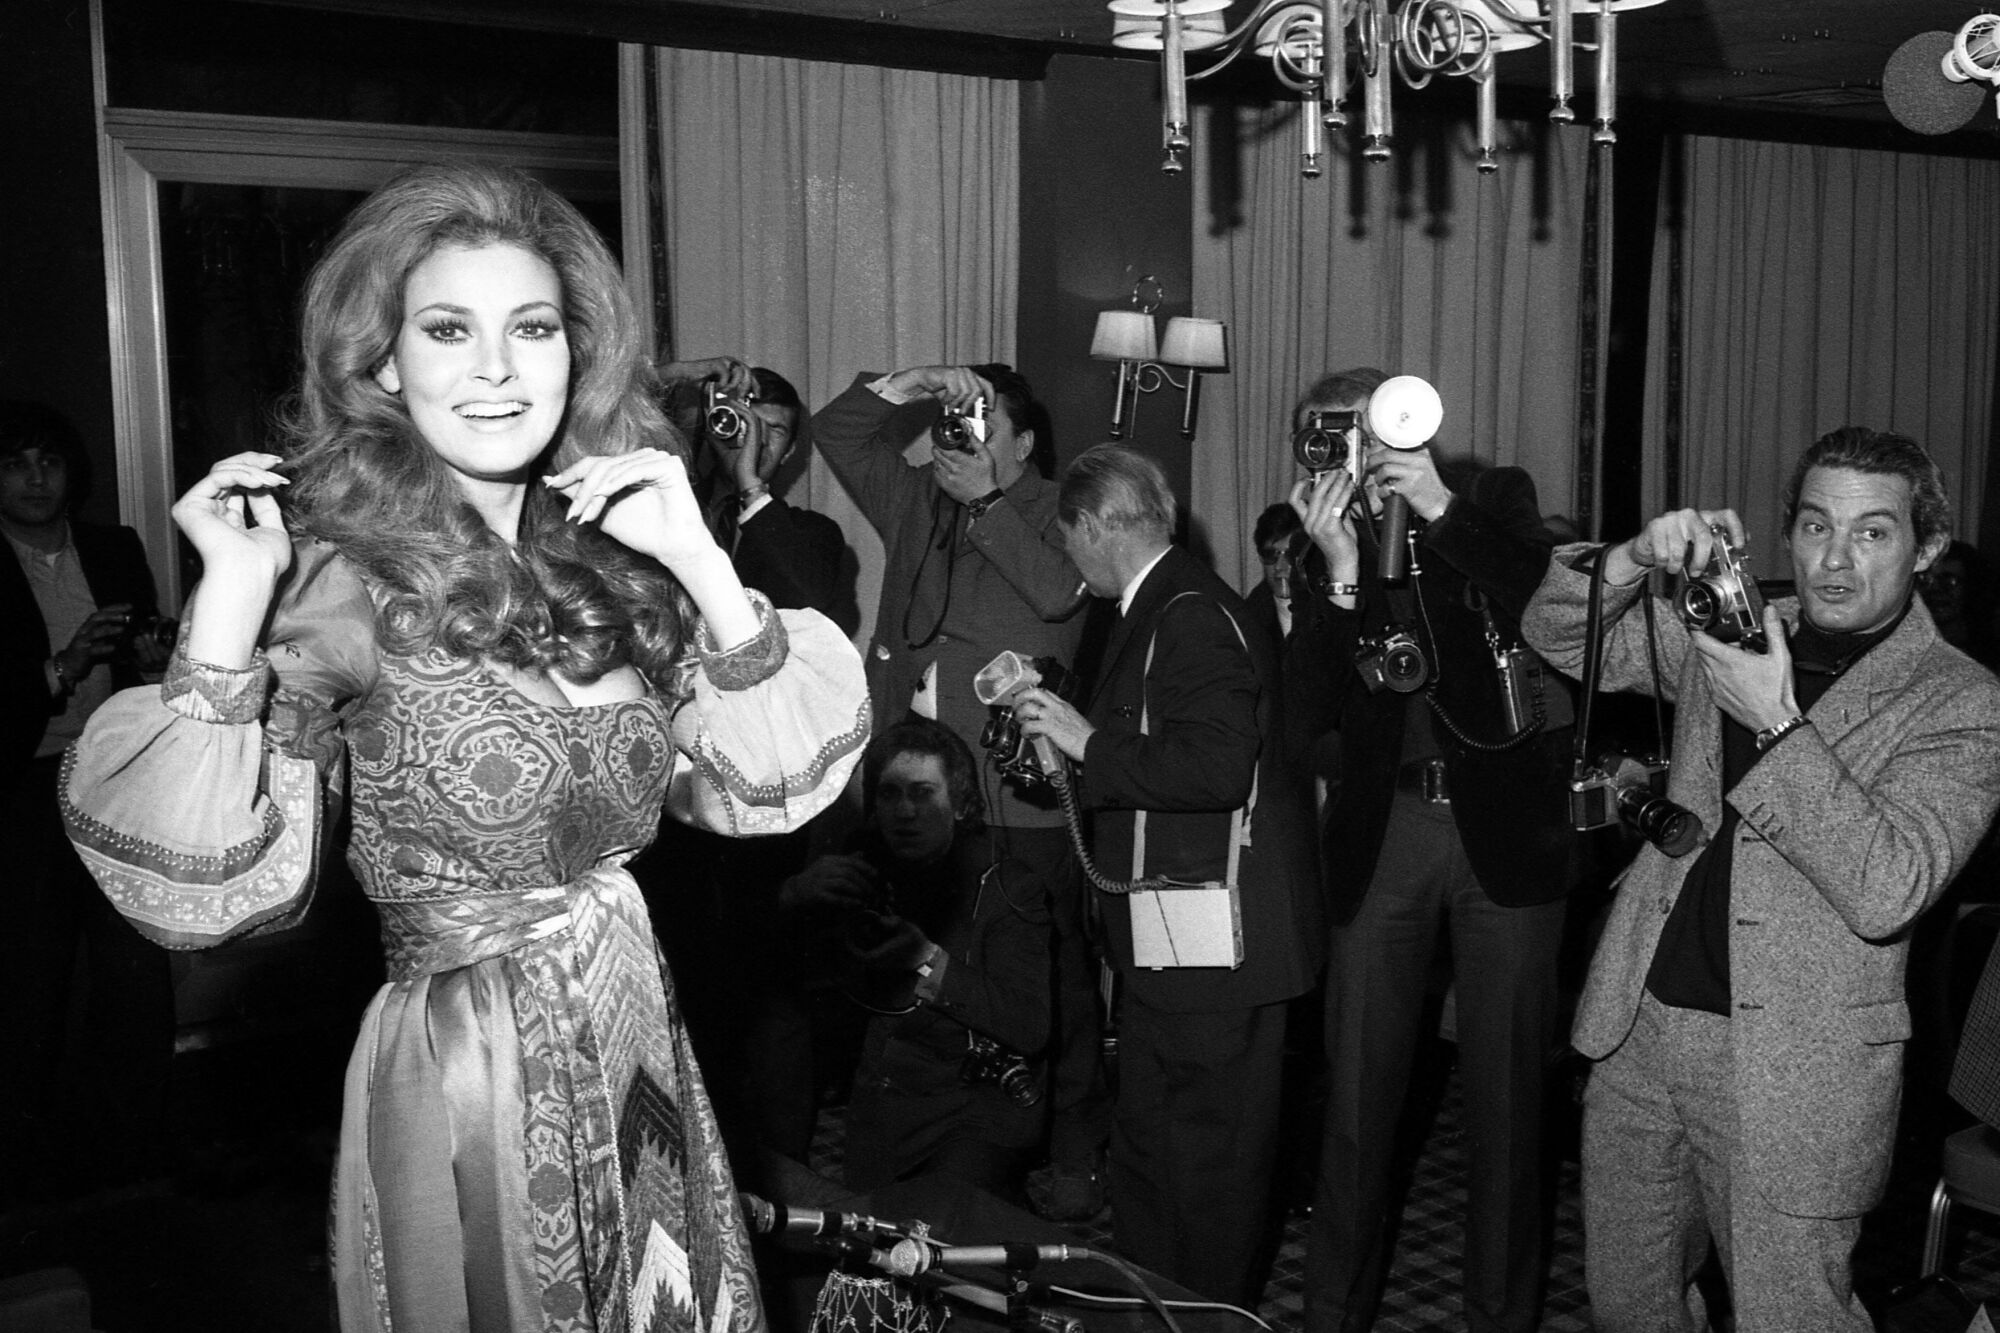 A black-and-white image of Raquel Welch, turning away from journalists to smile for the camera.